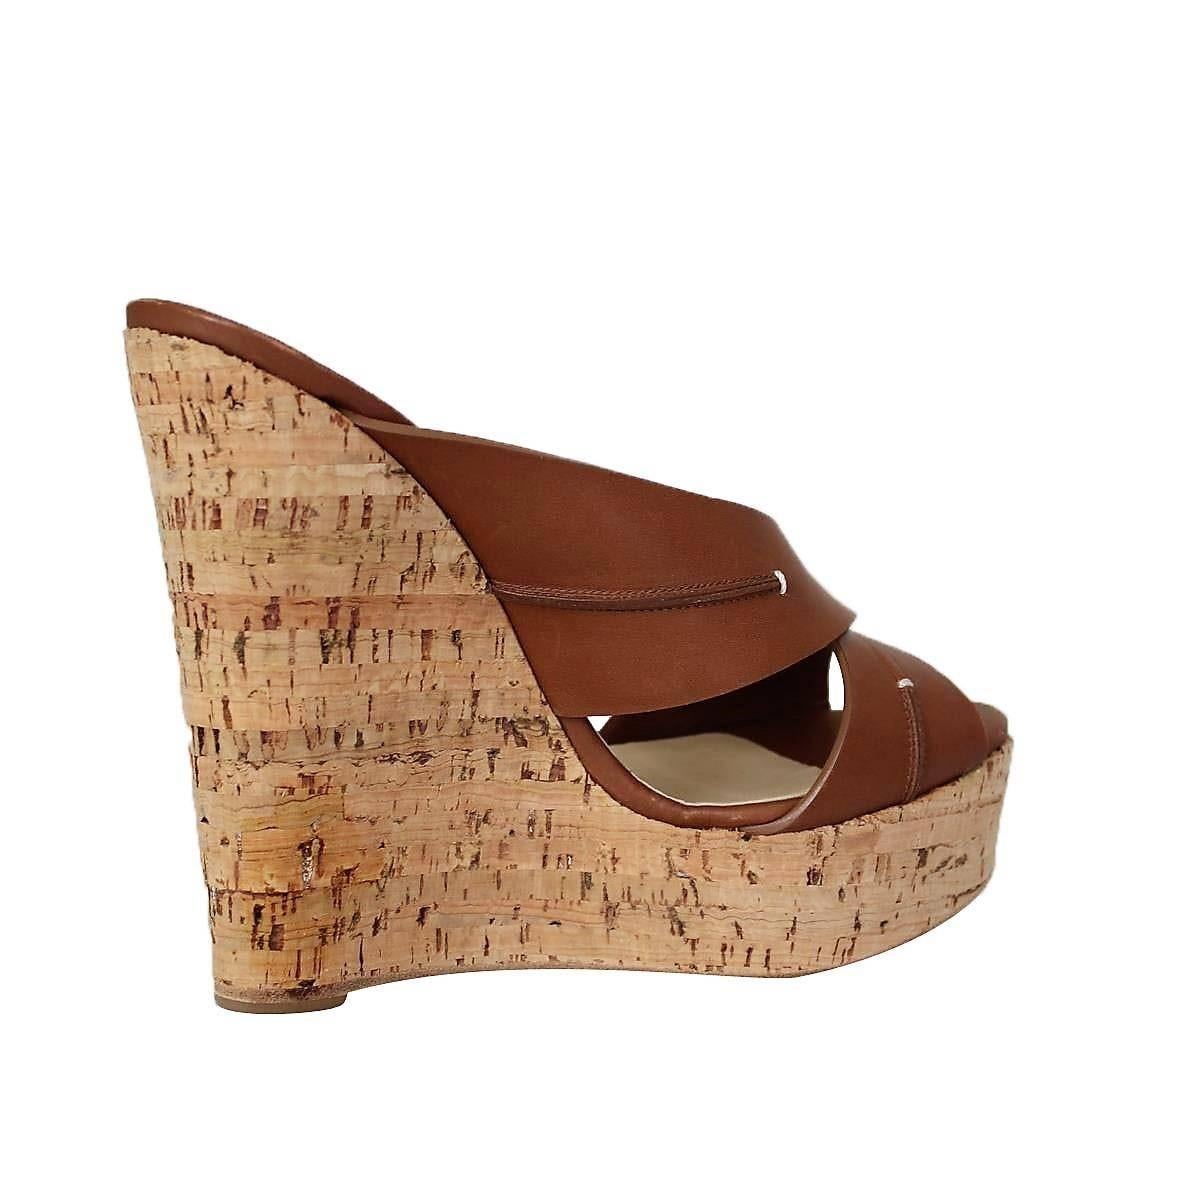 Cork wedge
Brown leather
Heel height cm 14 (5.5 inches)
Plateau cm 4 (1.57 inches)
Made in Italy
Worldwide express shipping included in the price !